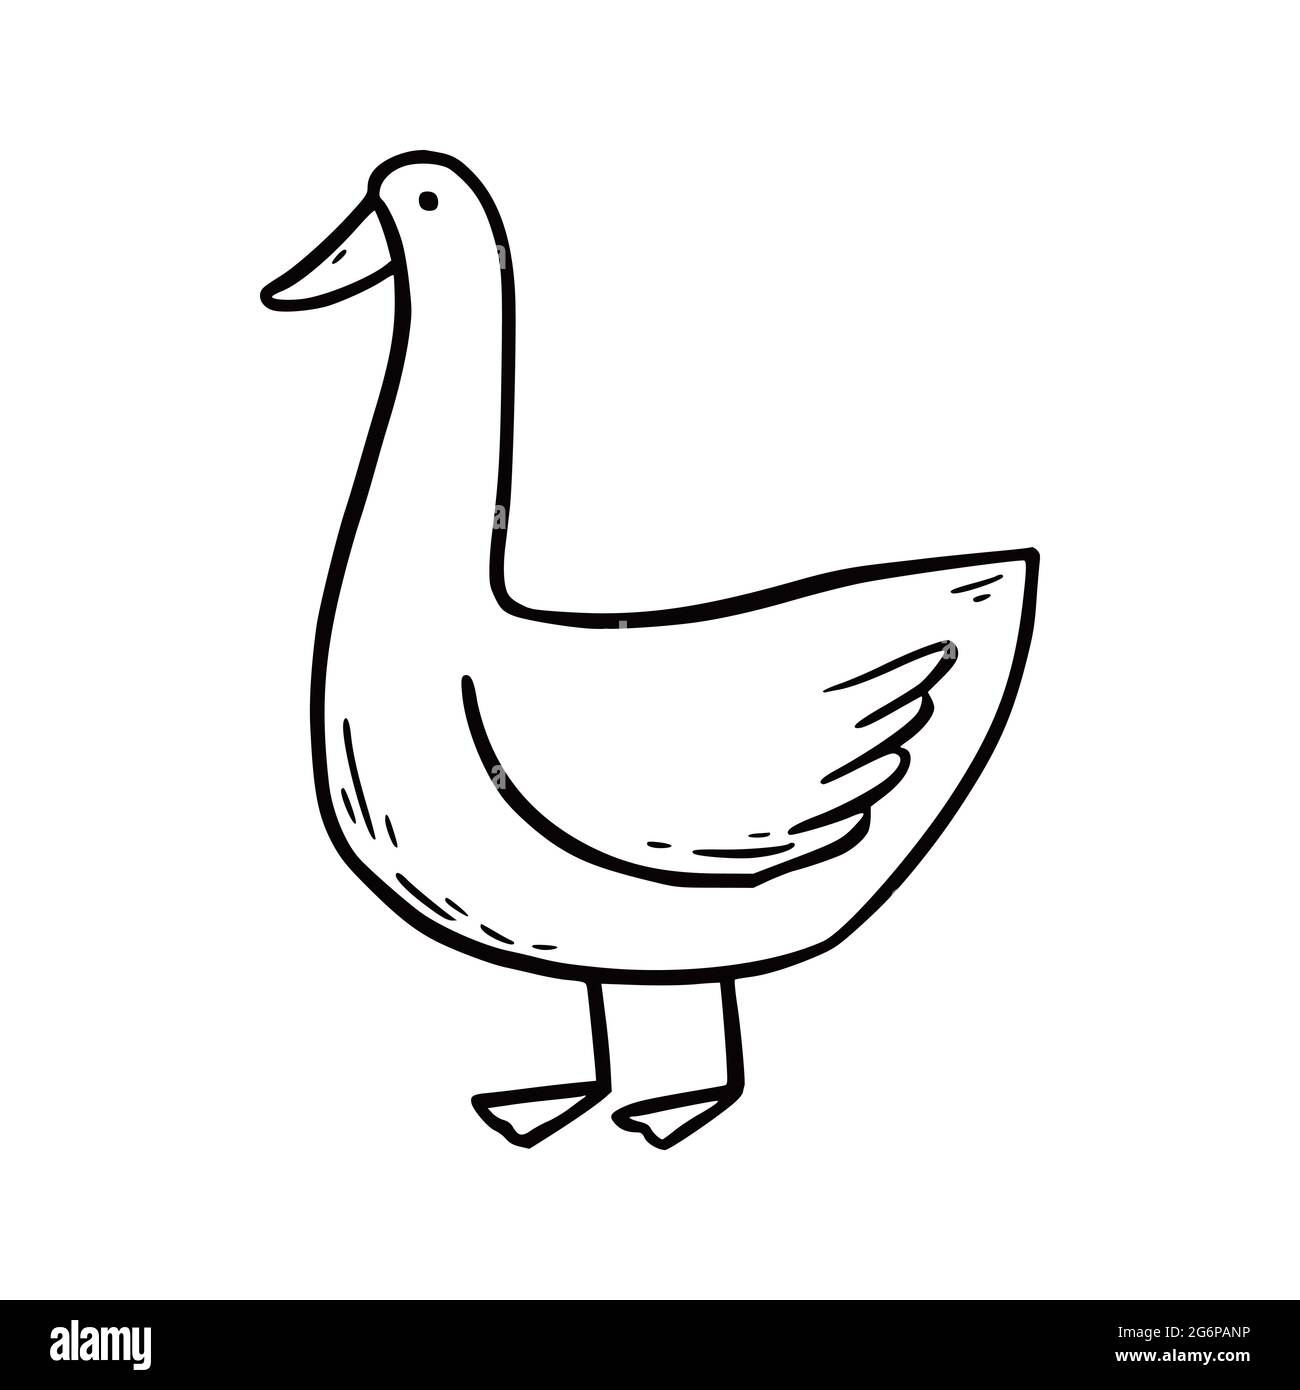 Duck drawing - How to draw a duck - Easy drawings easy